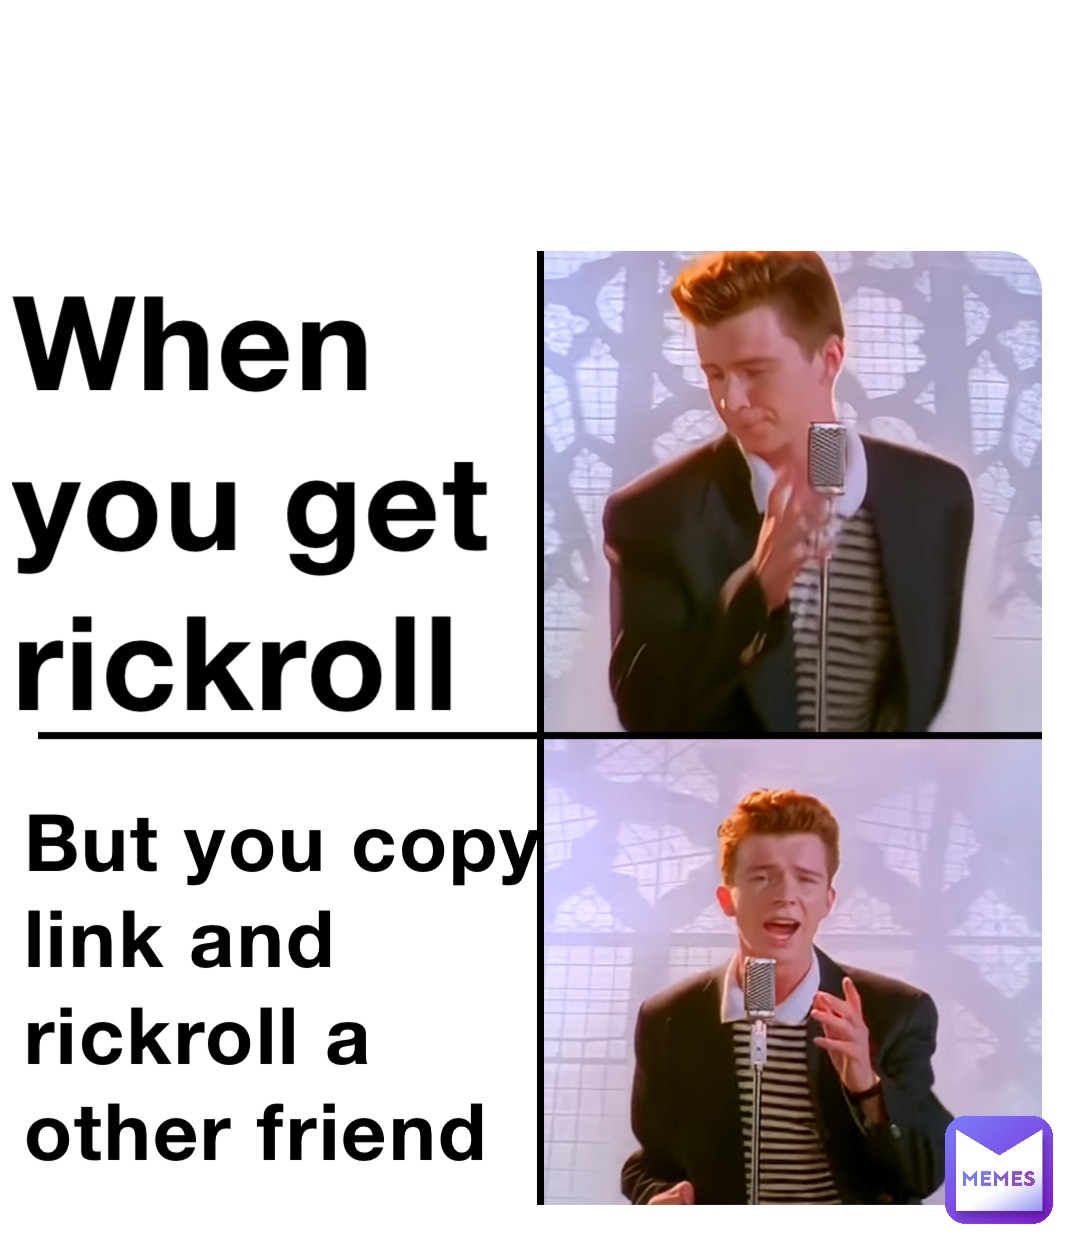 When you get rickroll But you copy link and rickroll a other friend, @boixd